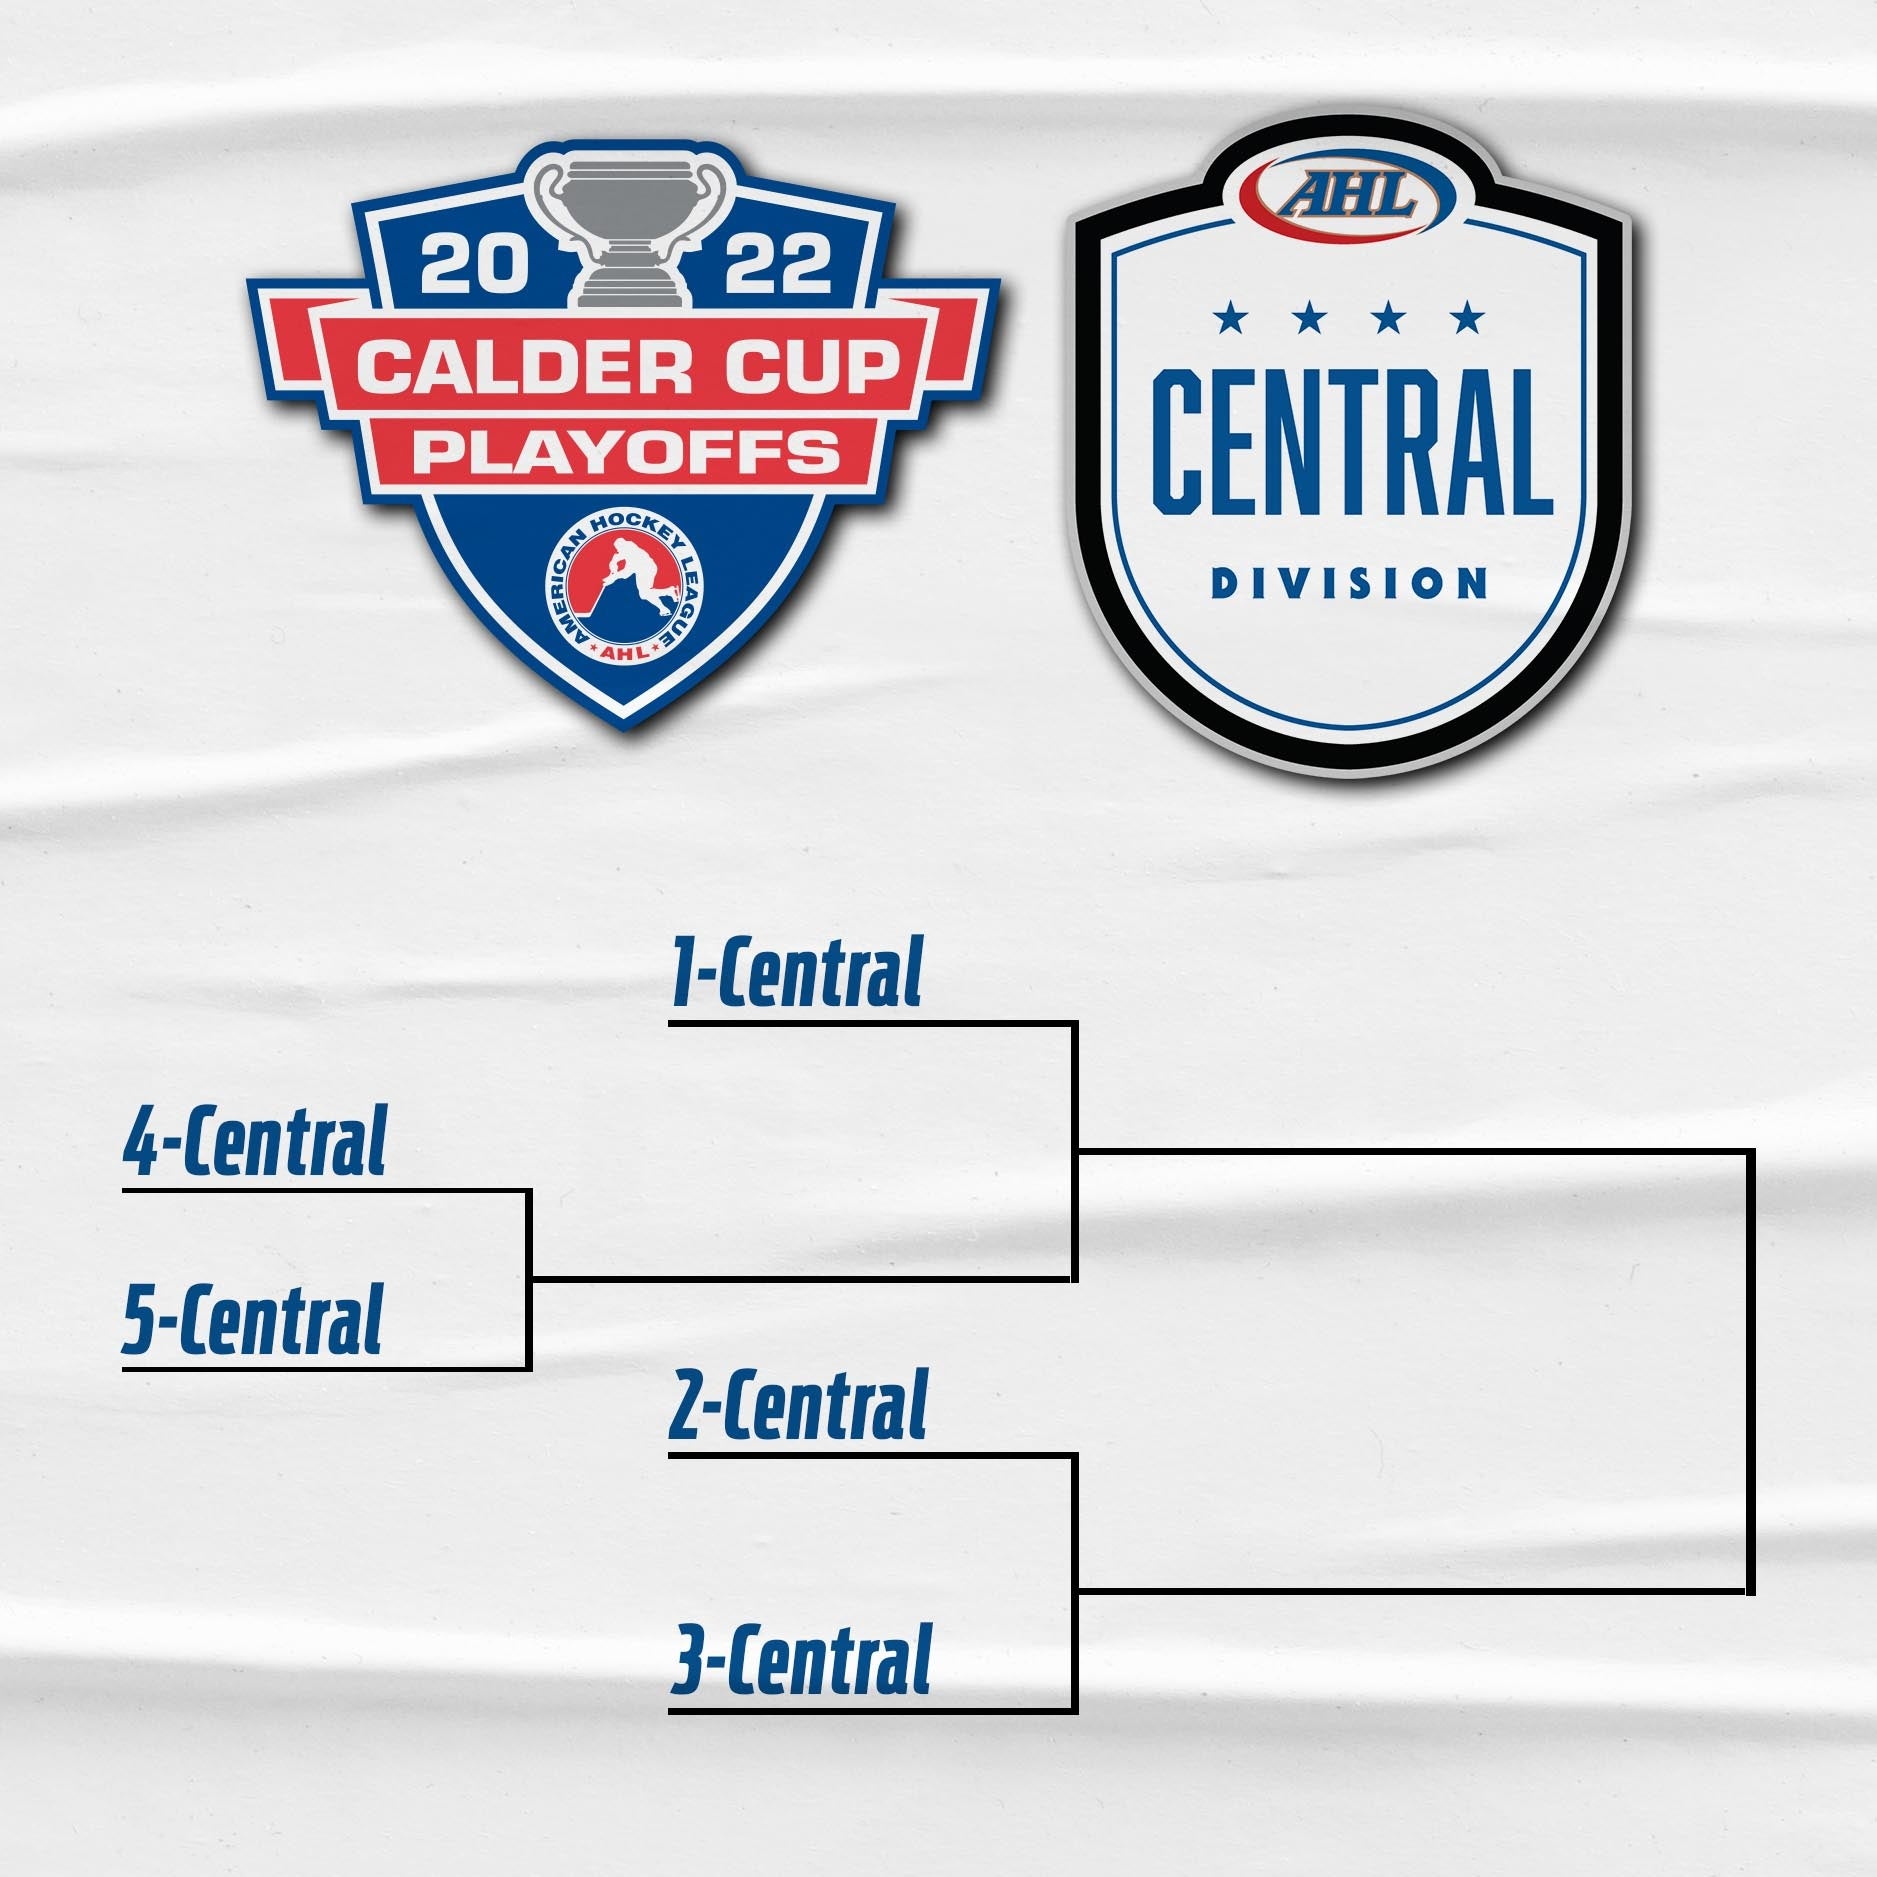 2022 Central Division Playoff Format.jpg